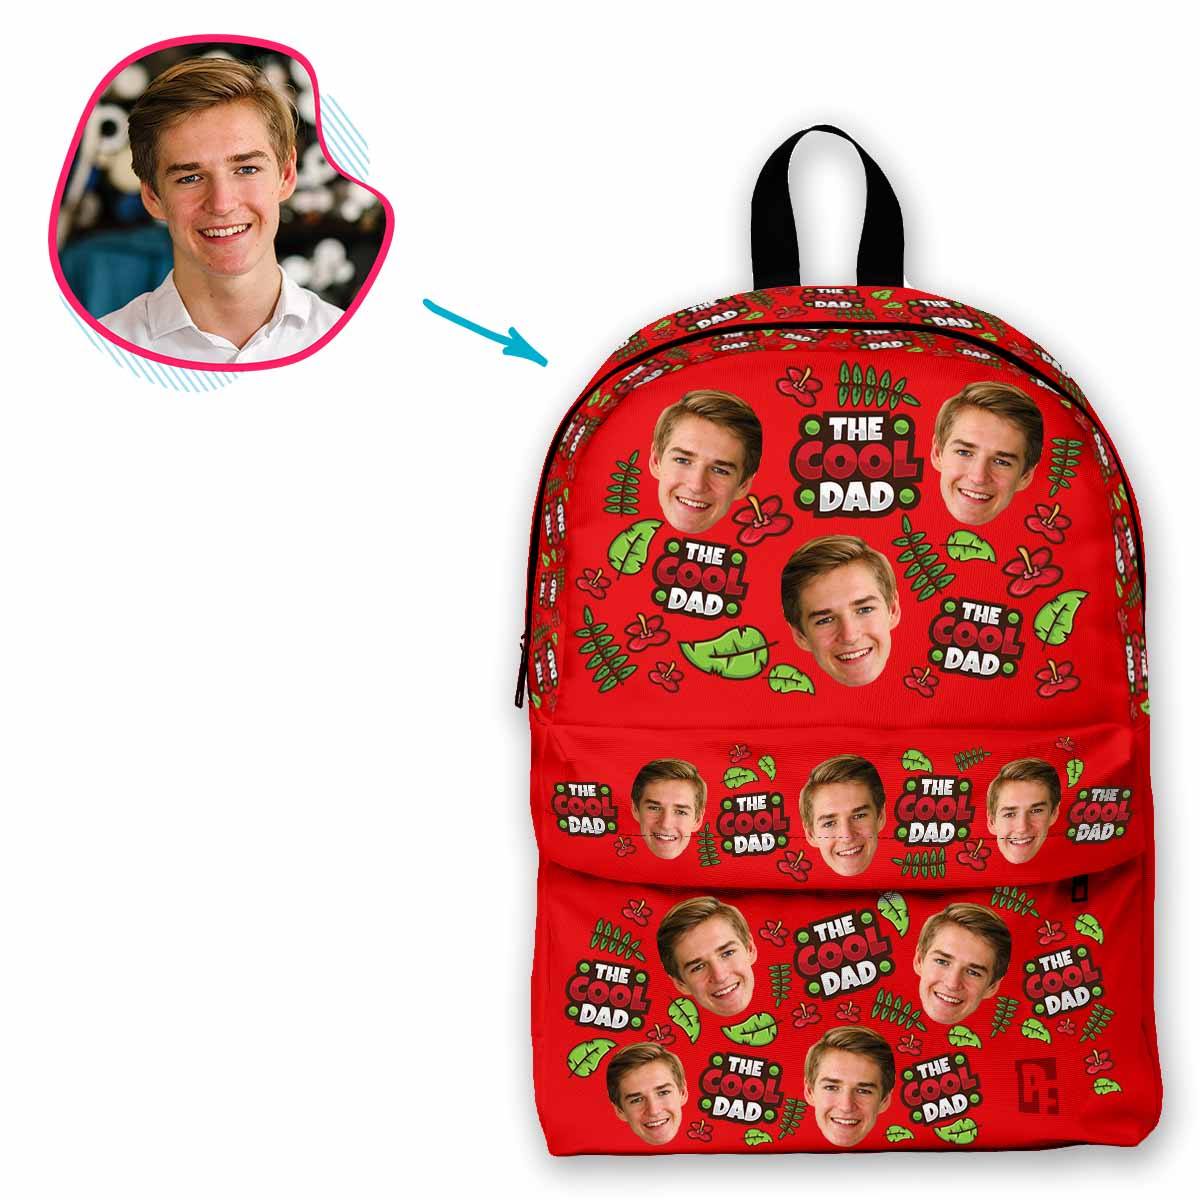 red The Cool Dad classic backpack personalized with photo of face printed on it